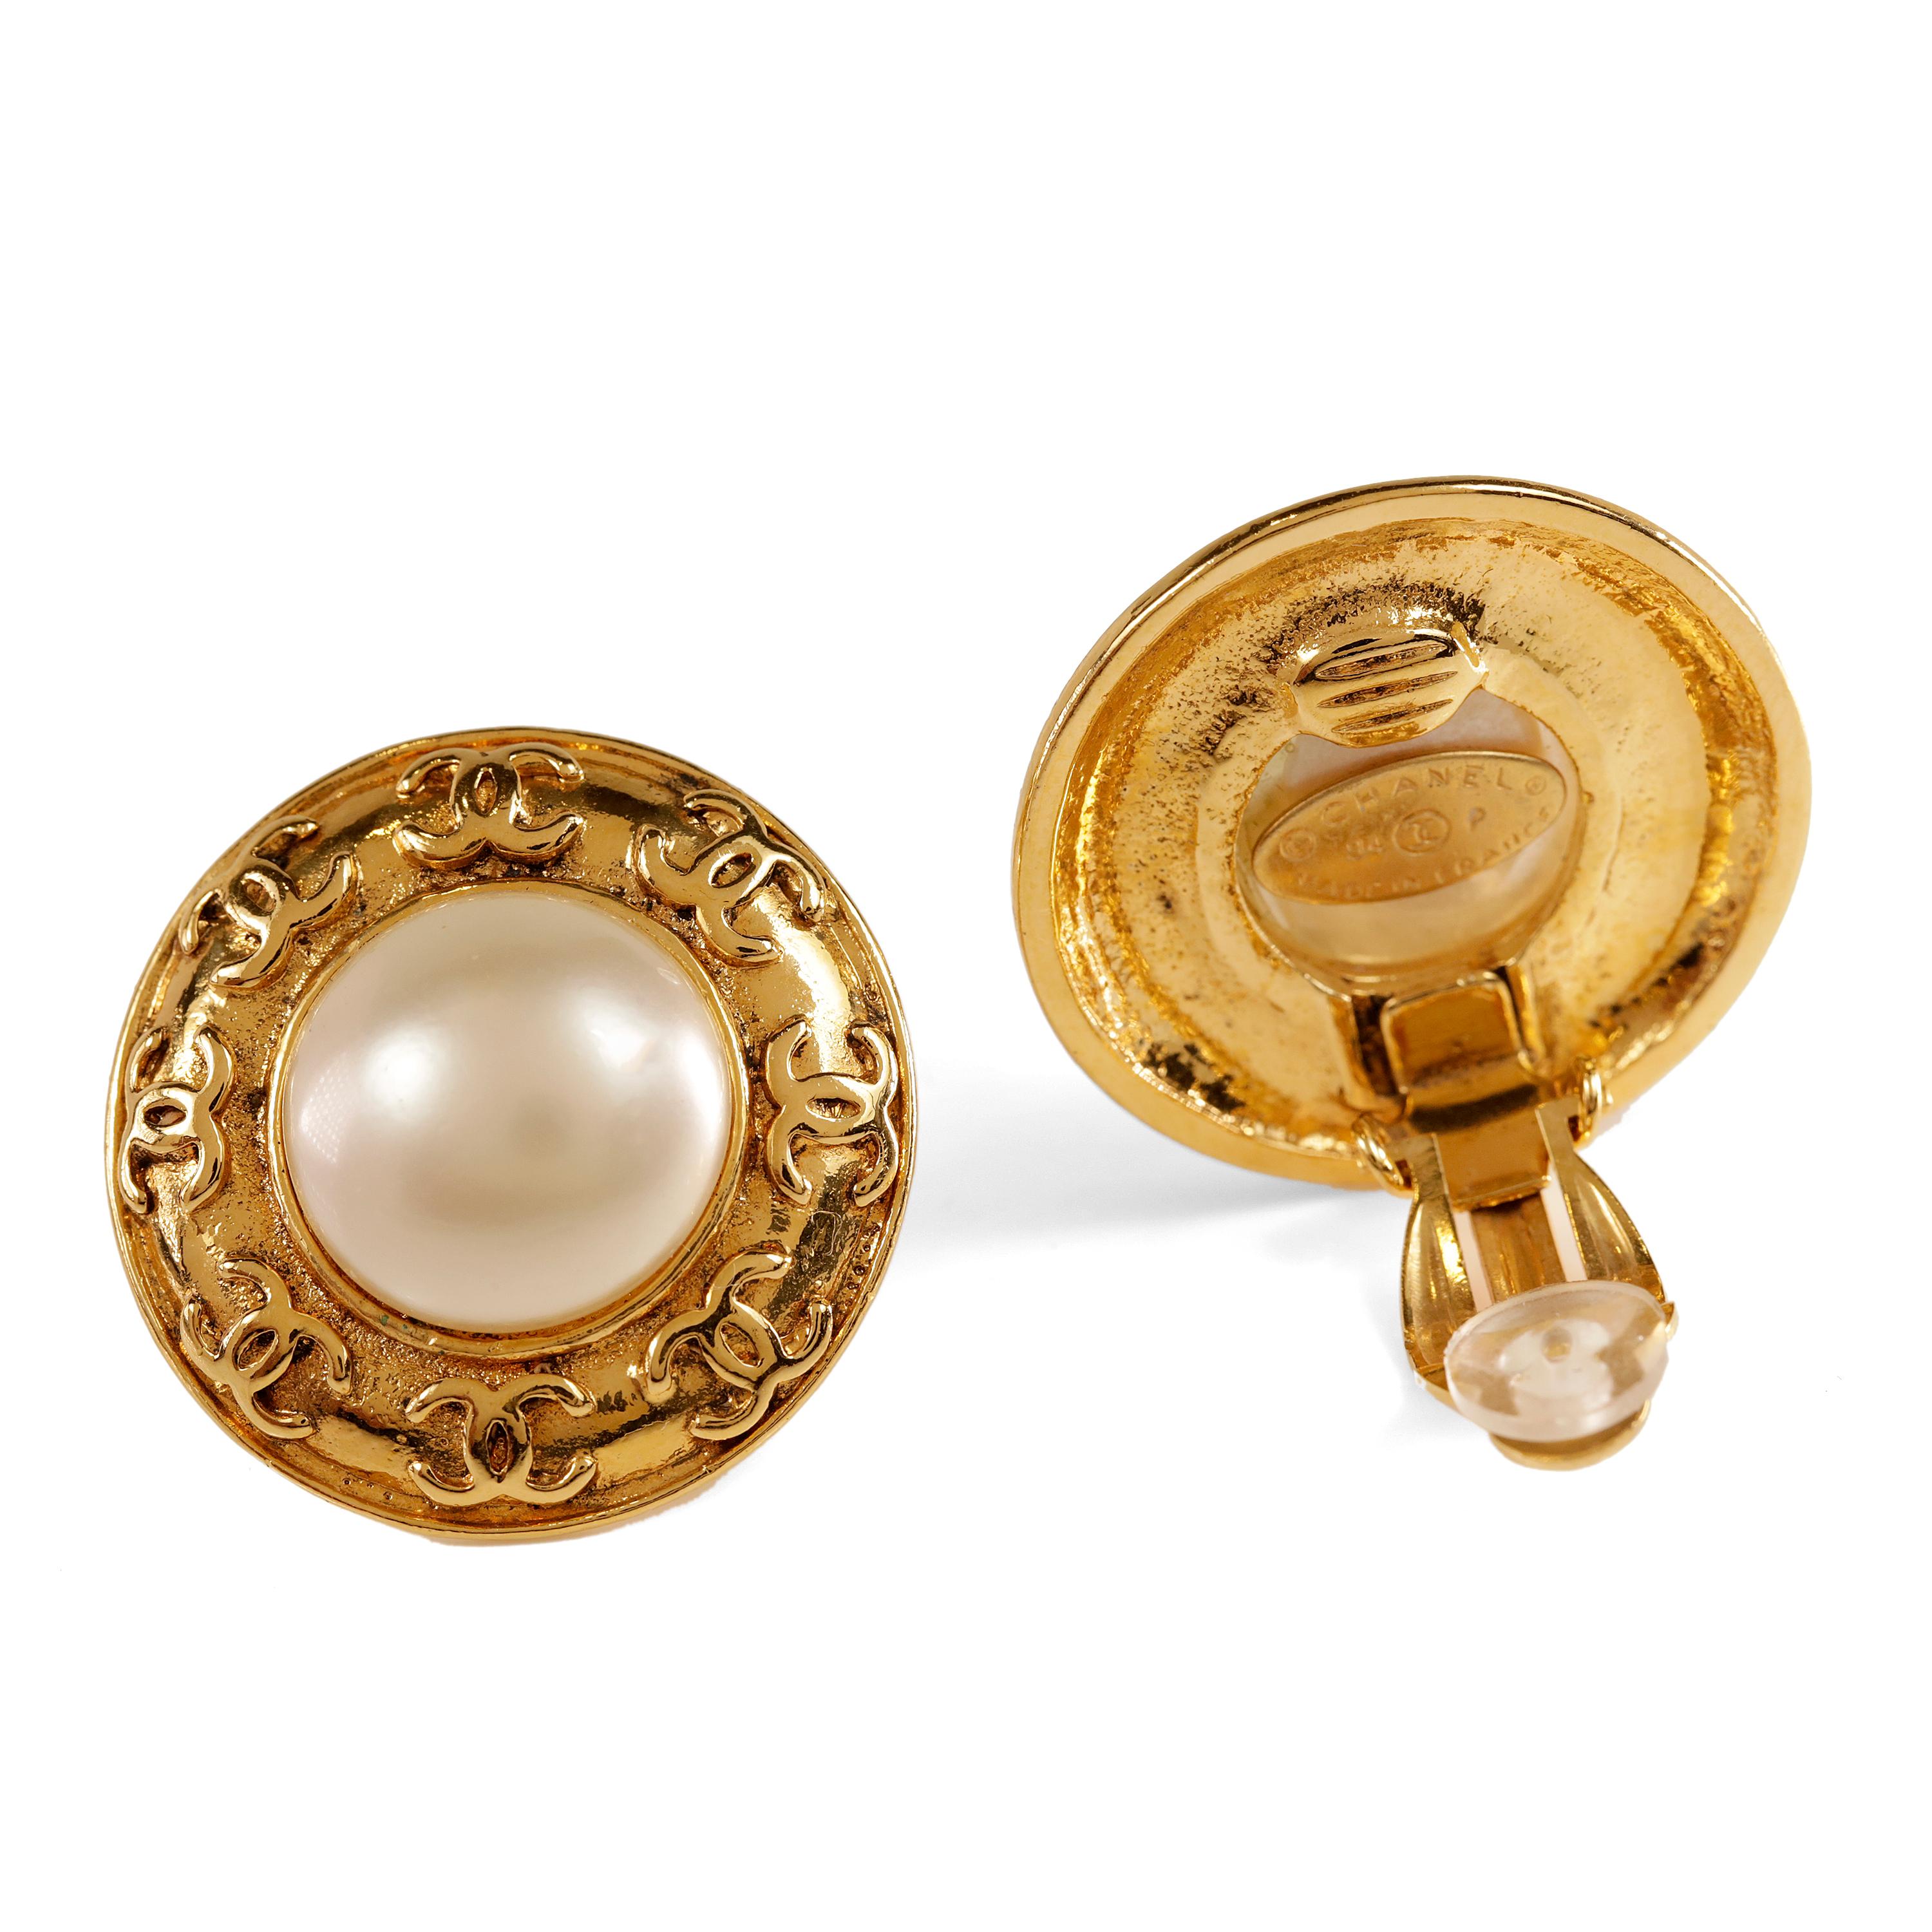 These authentic Chanel Gold Pearl Clip On Earrings are in excellent vintage condition.  From the 1994 collection, they feature a round faux pearl surrounded by gold interlocking CC border. Clip on closure.  Made in France.  

